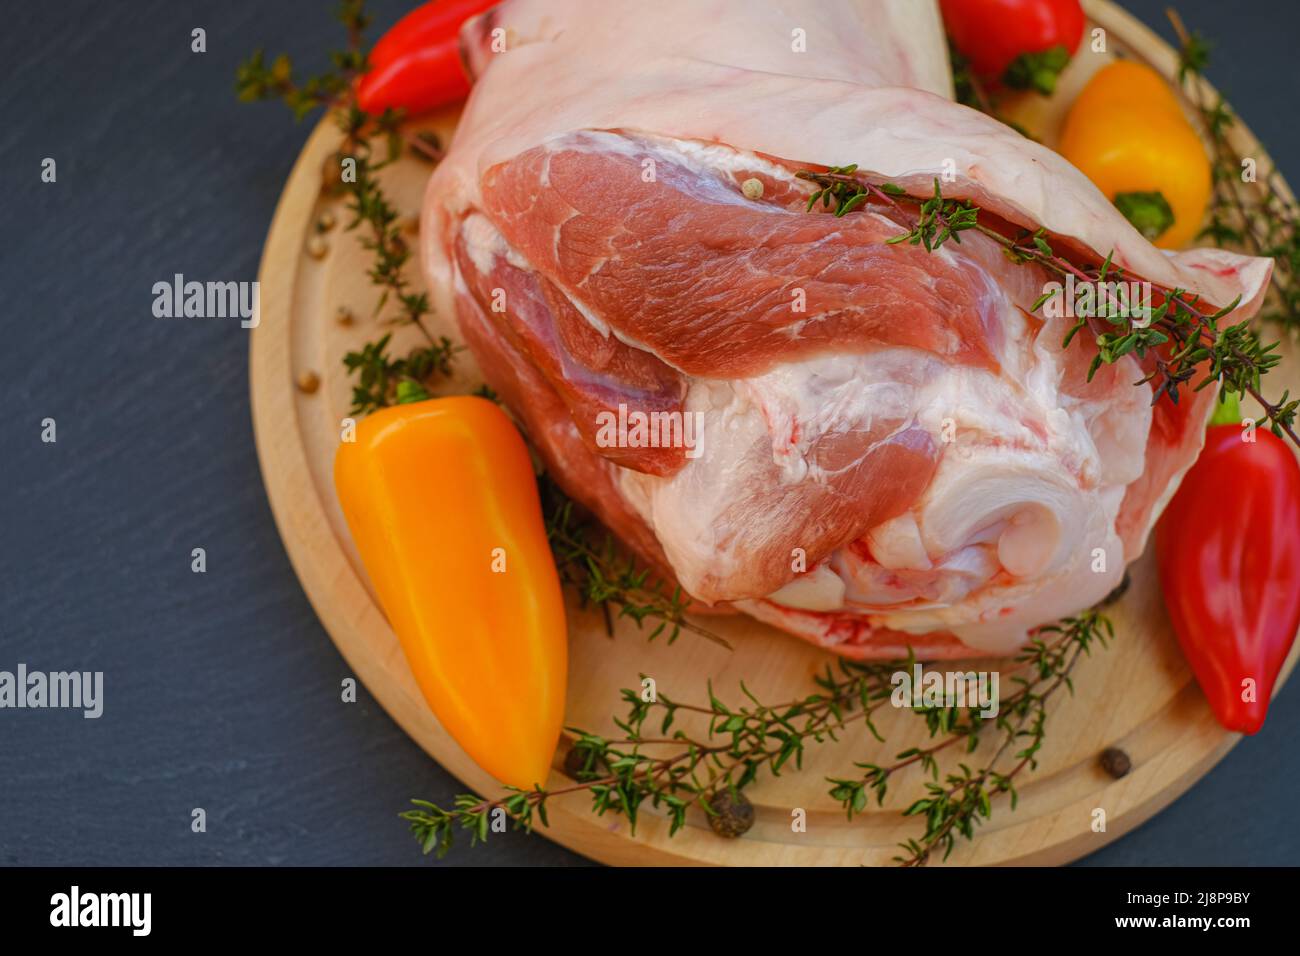 Pork meat on the bone, sweet fresh pepper and thyme herb on a wooden board on a black background.Meat products.Farm organic bio meat. Stock Photo